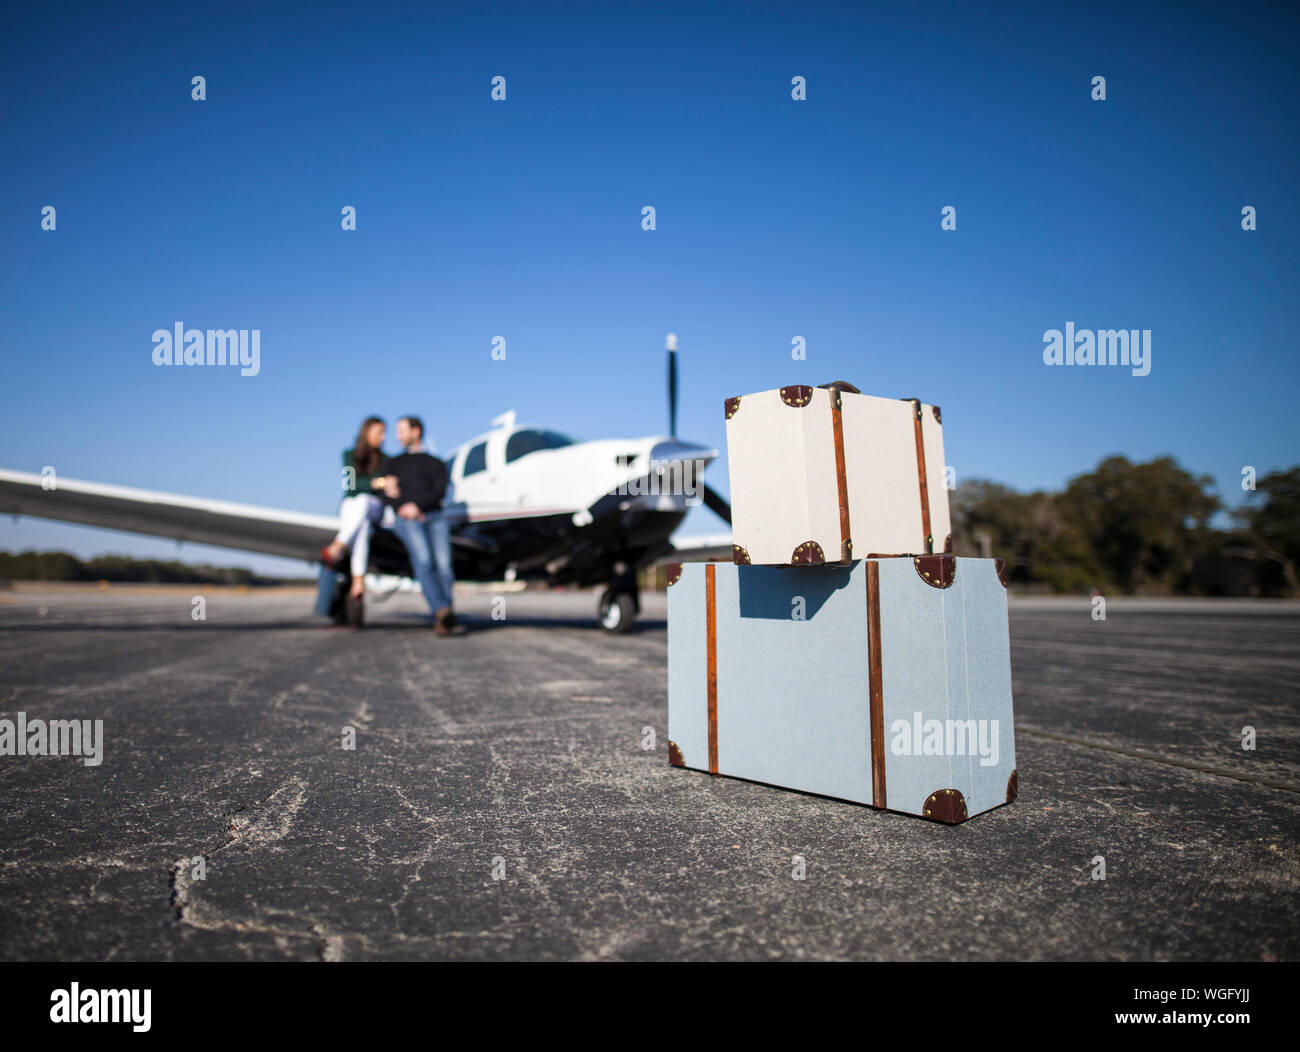 Couple getting ready to go on private plane, focus on bags in foreground Stock Photo